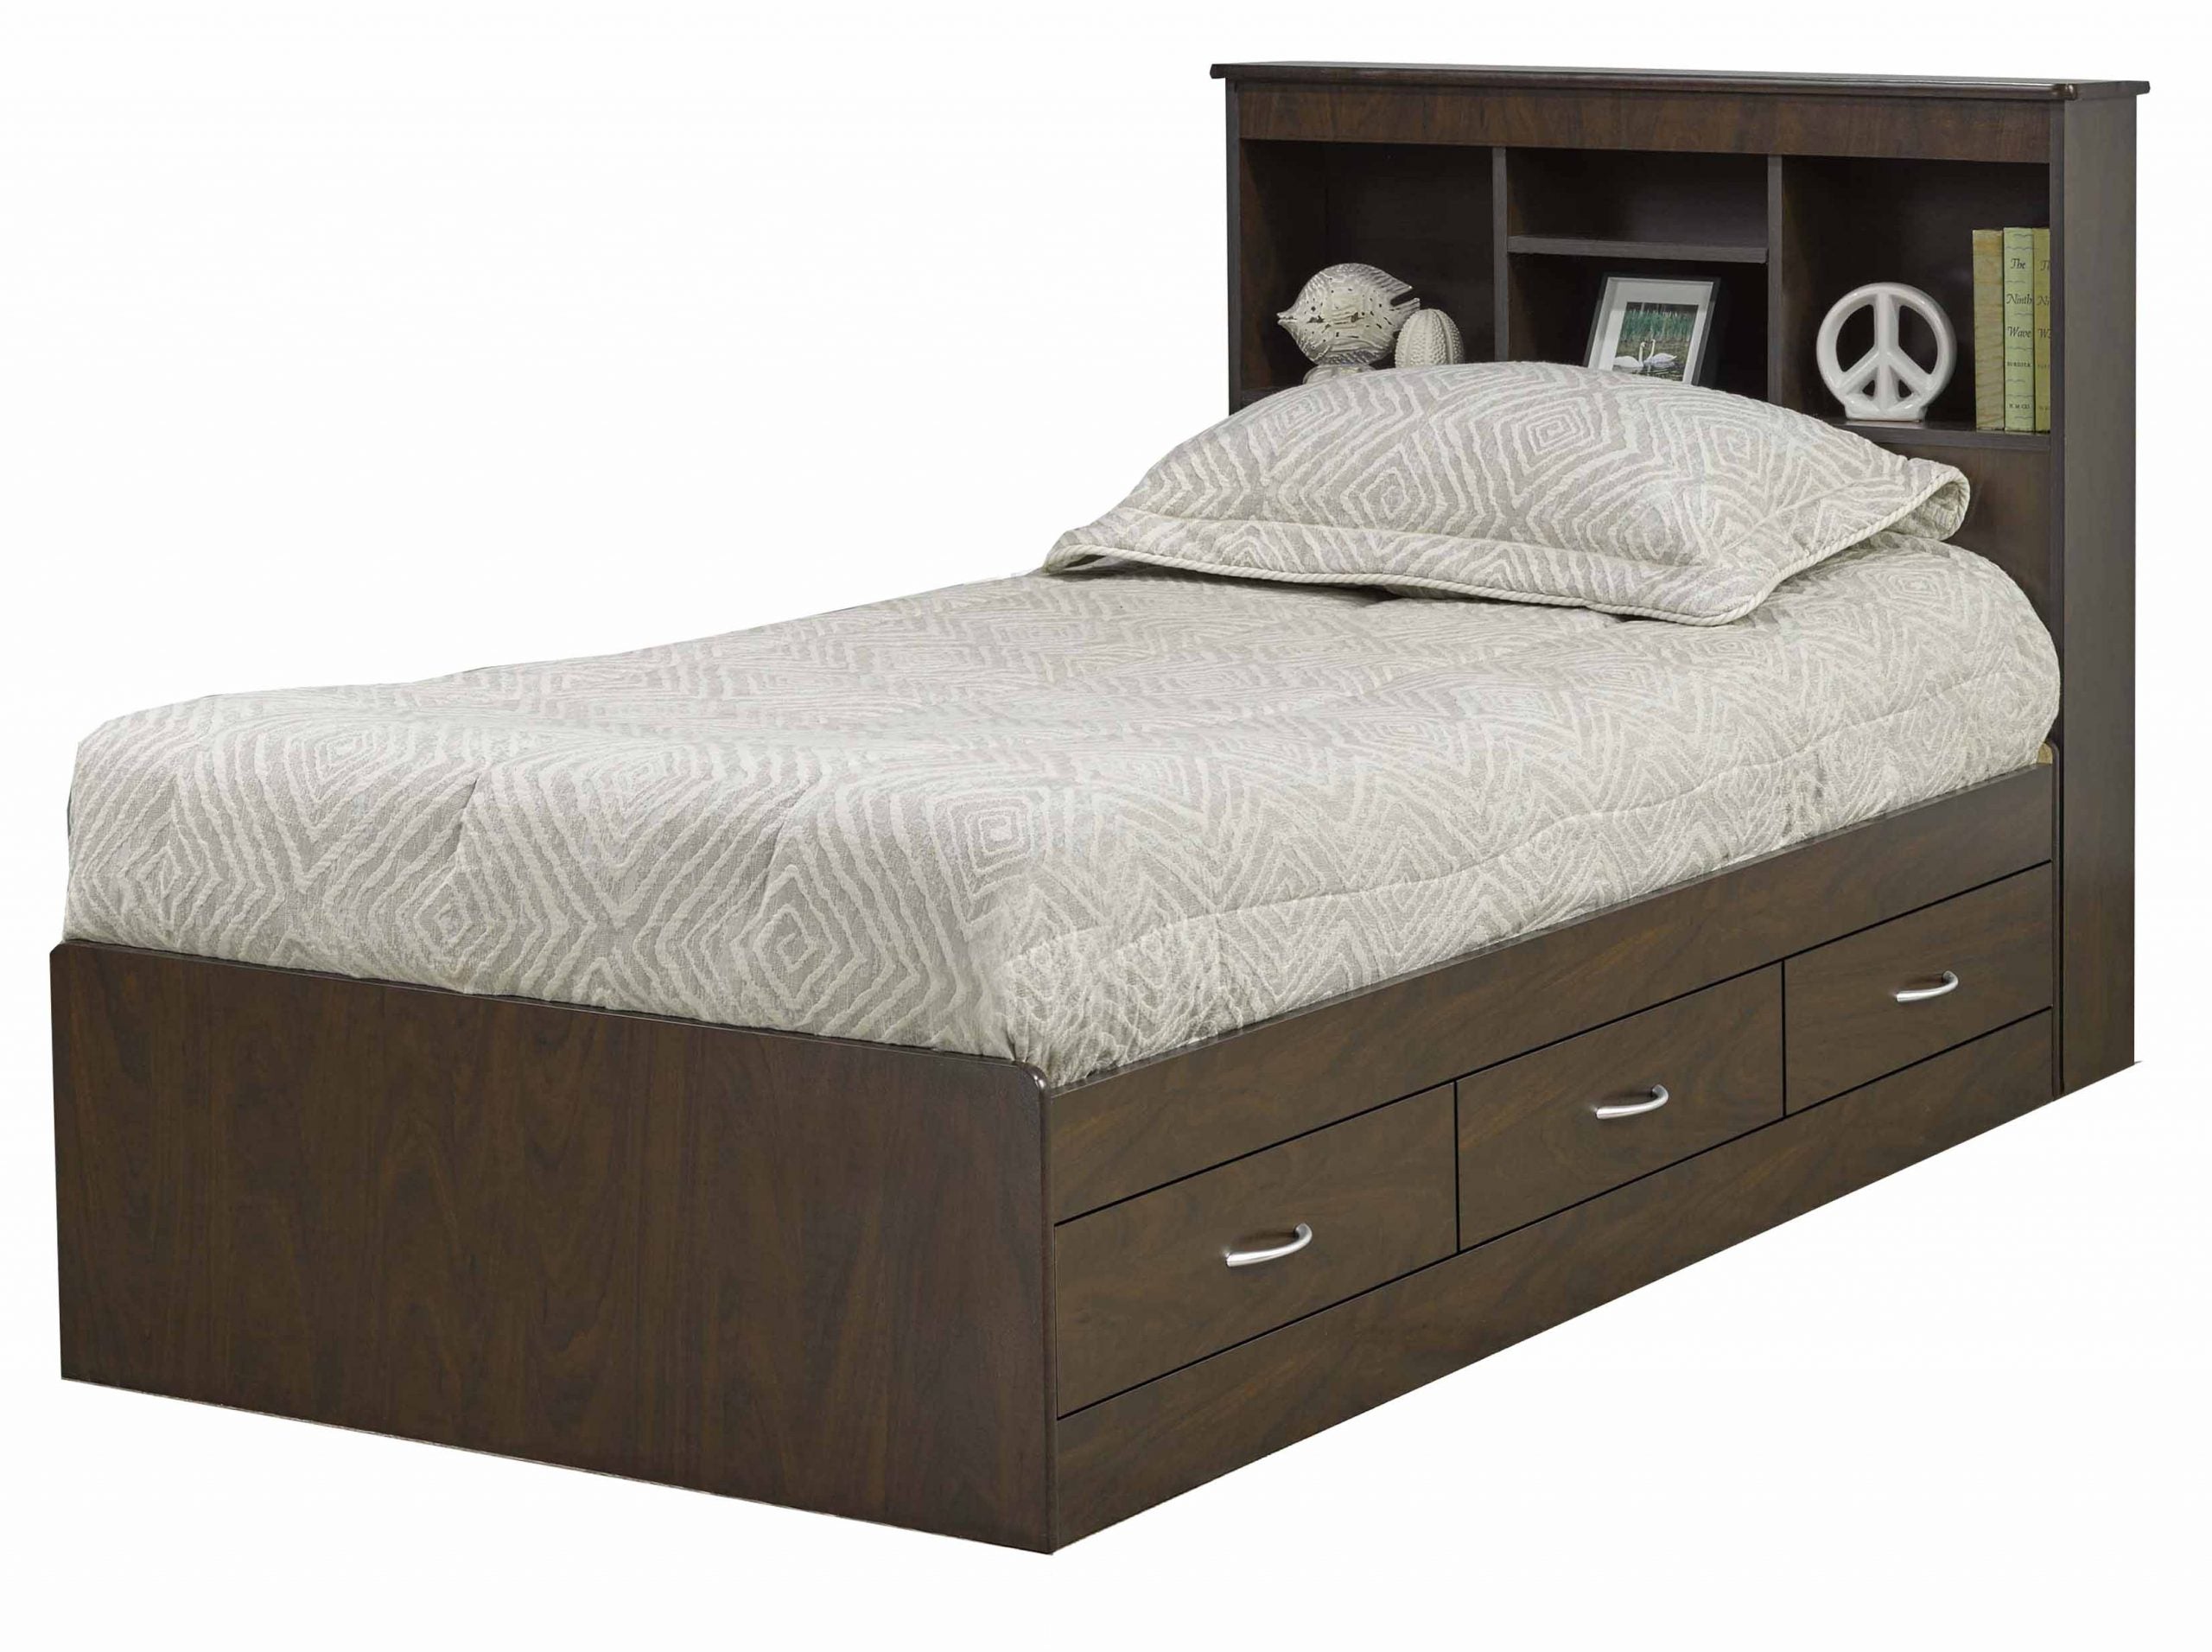 Canadian made Single Mates Bed with Bookcase Headboard